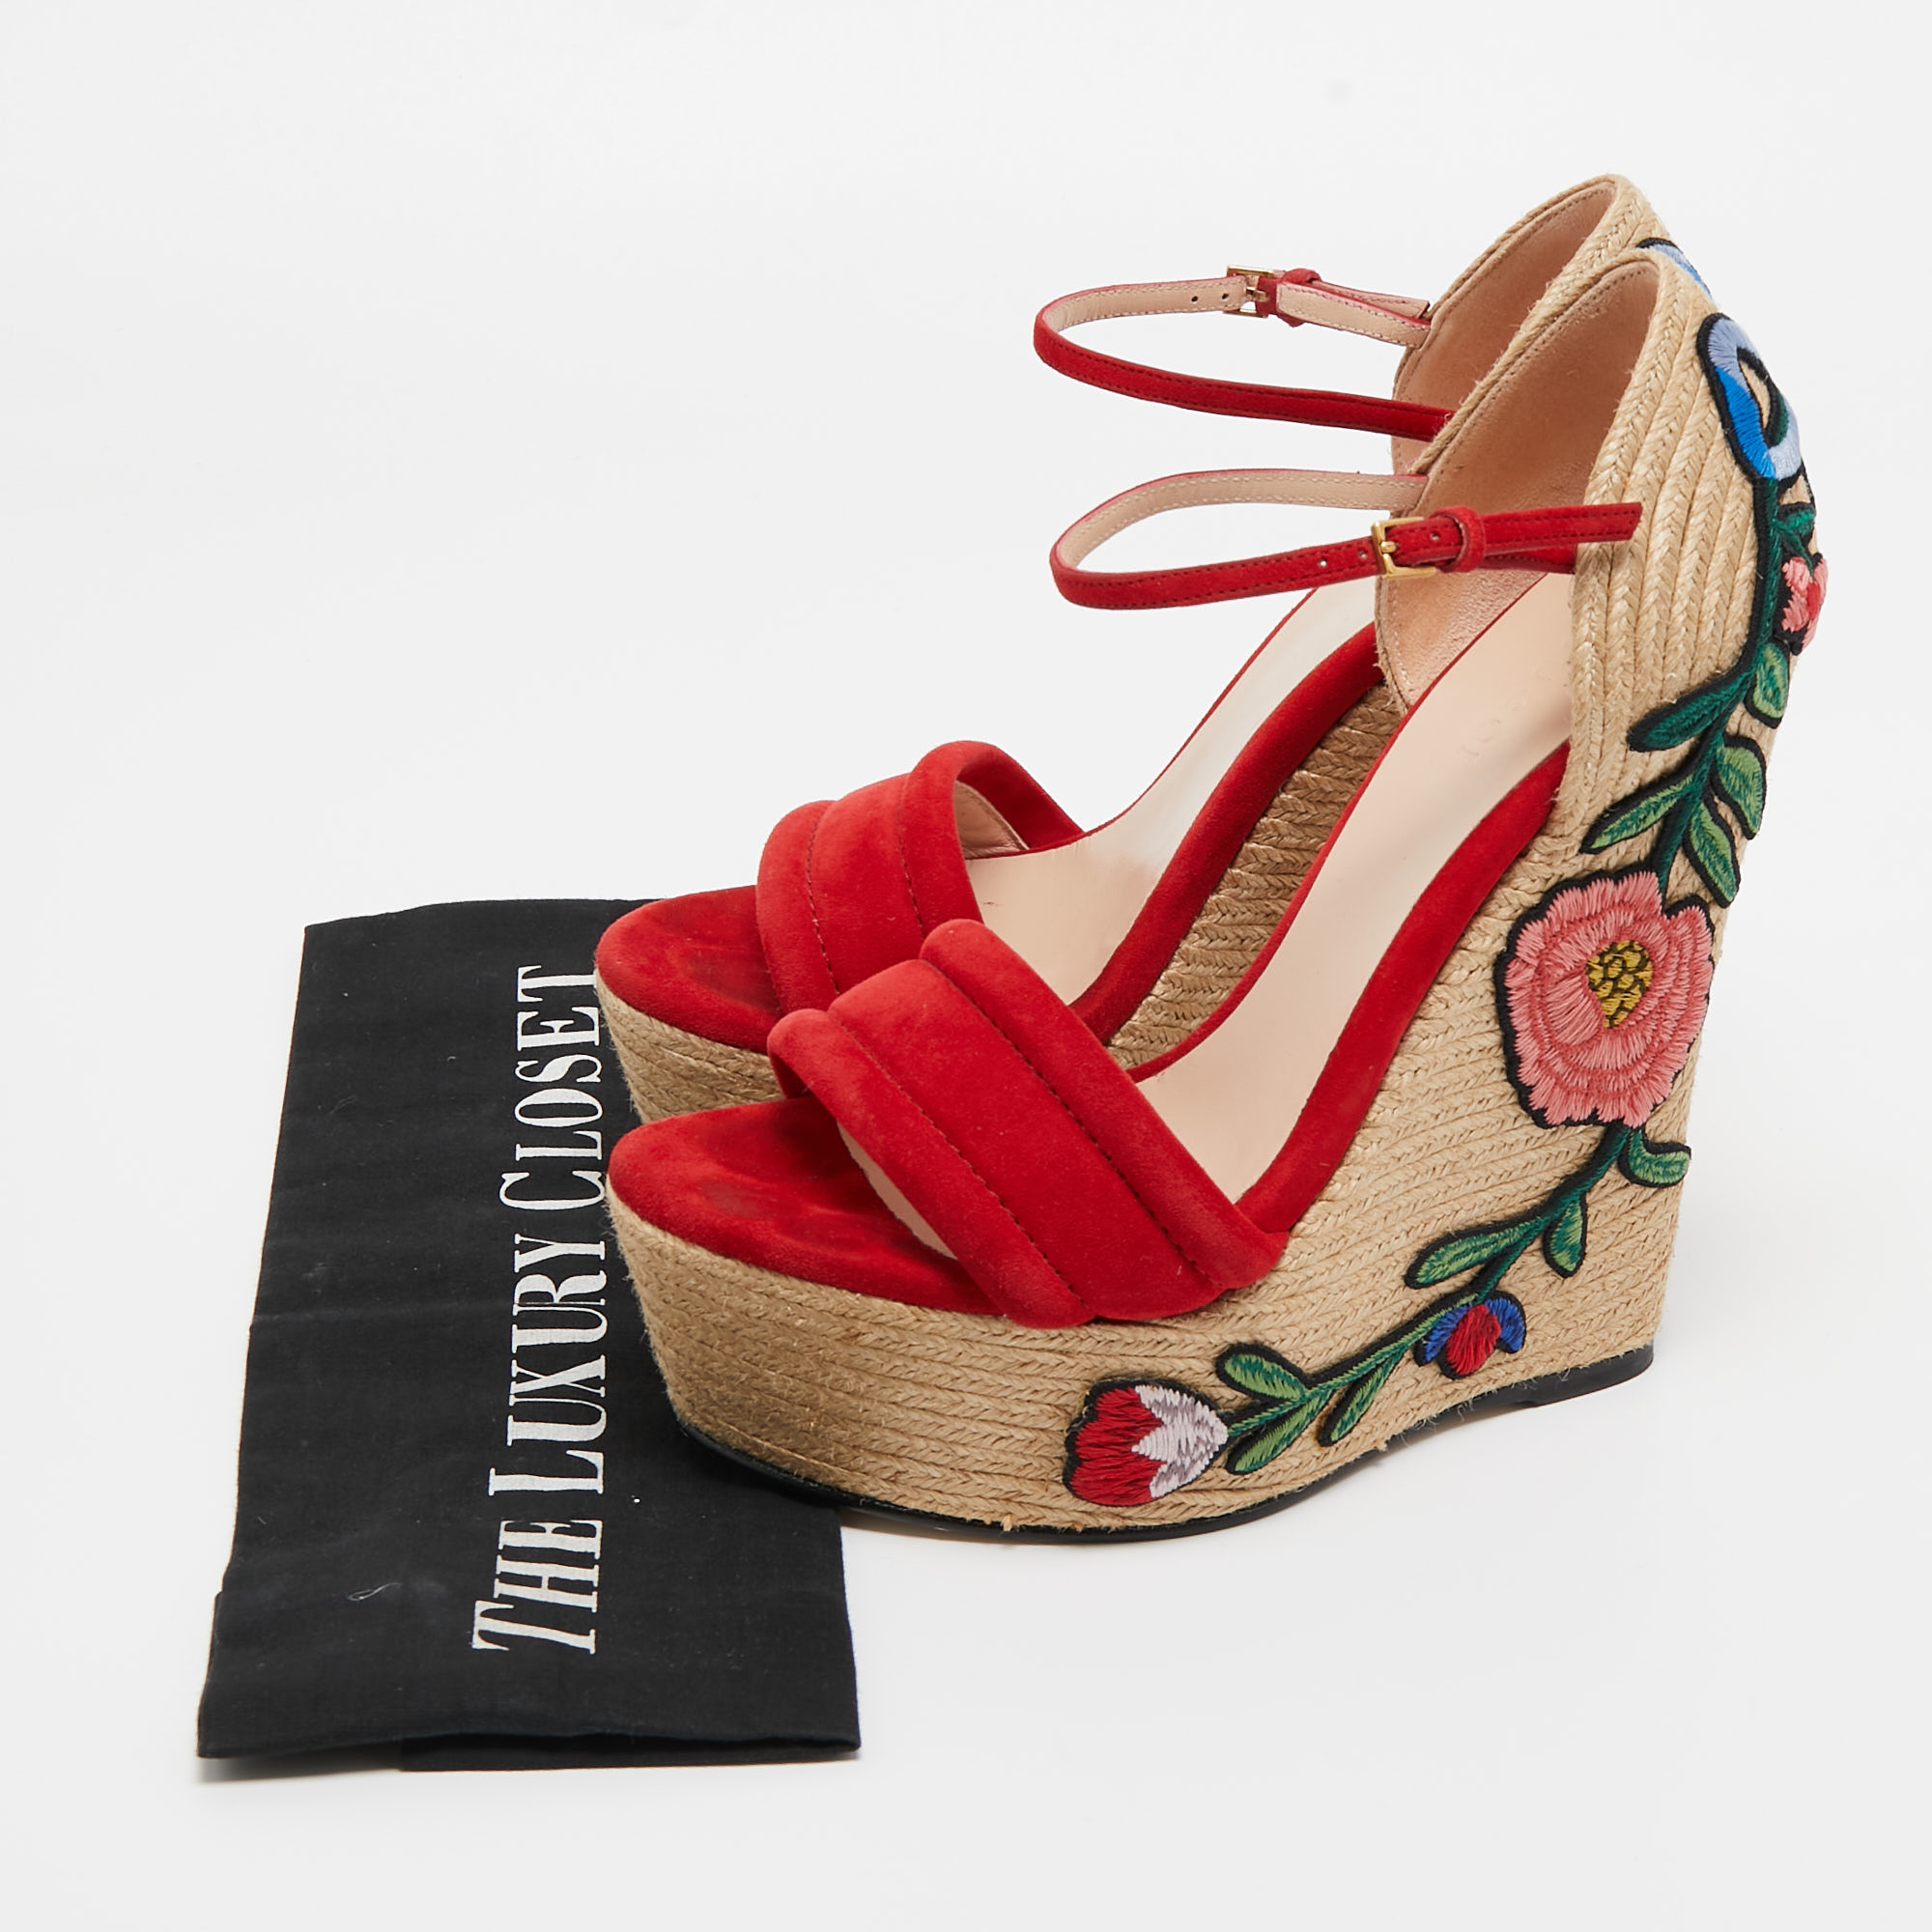 Gucci Red Suede Floral Embroidered Wedge Platform Ankle Strap Espadrilles Size 37